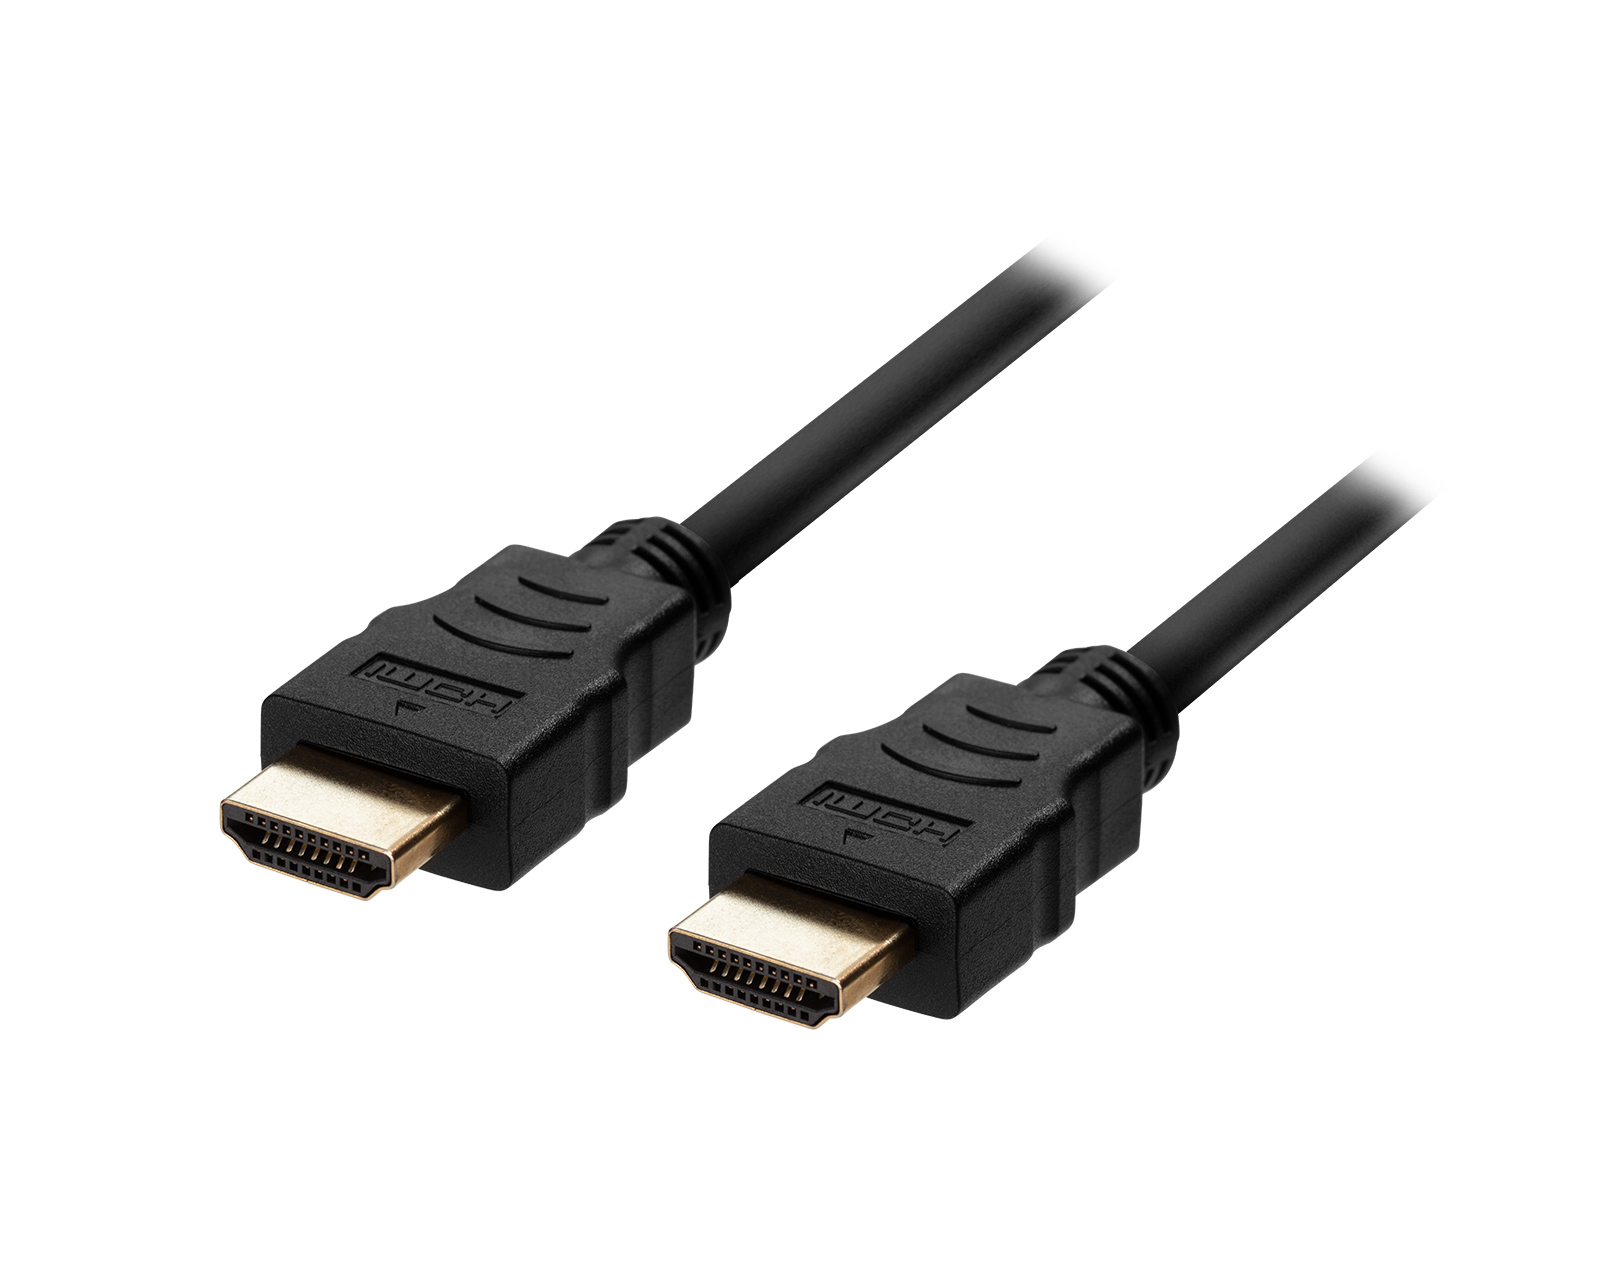 Master Cables Black HDMI Cable for Sony Playstation 4 Consoles - 2m -  High-Speed, Gold Plated, Premium Quality : Video Games 